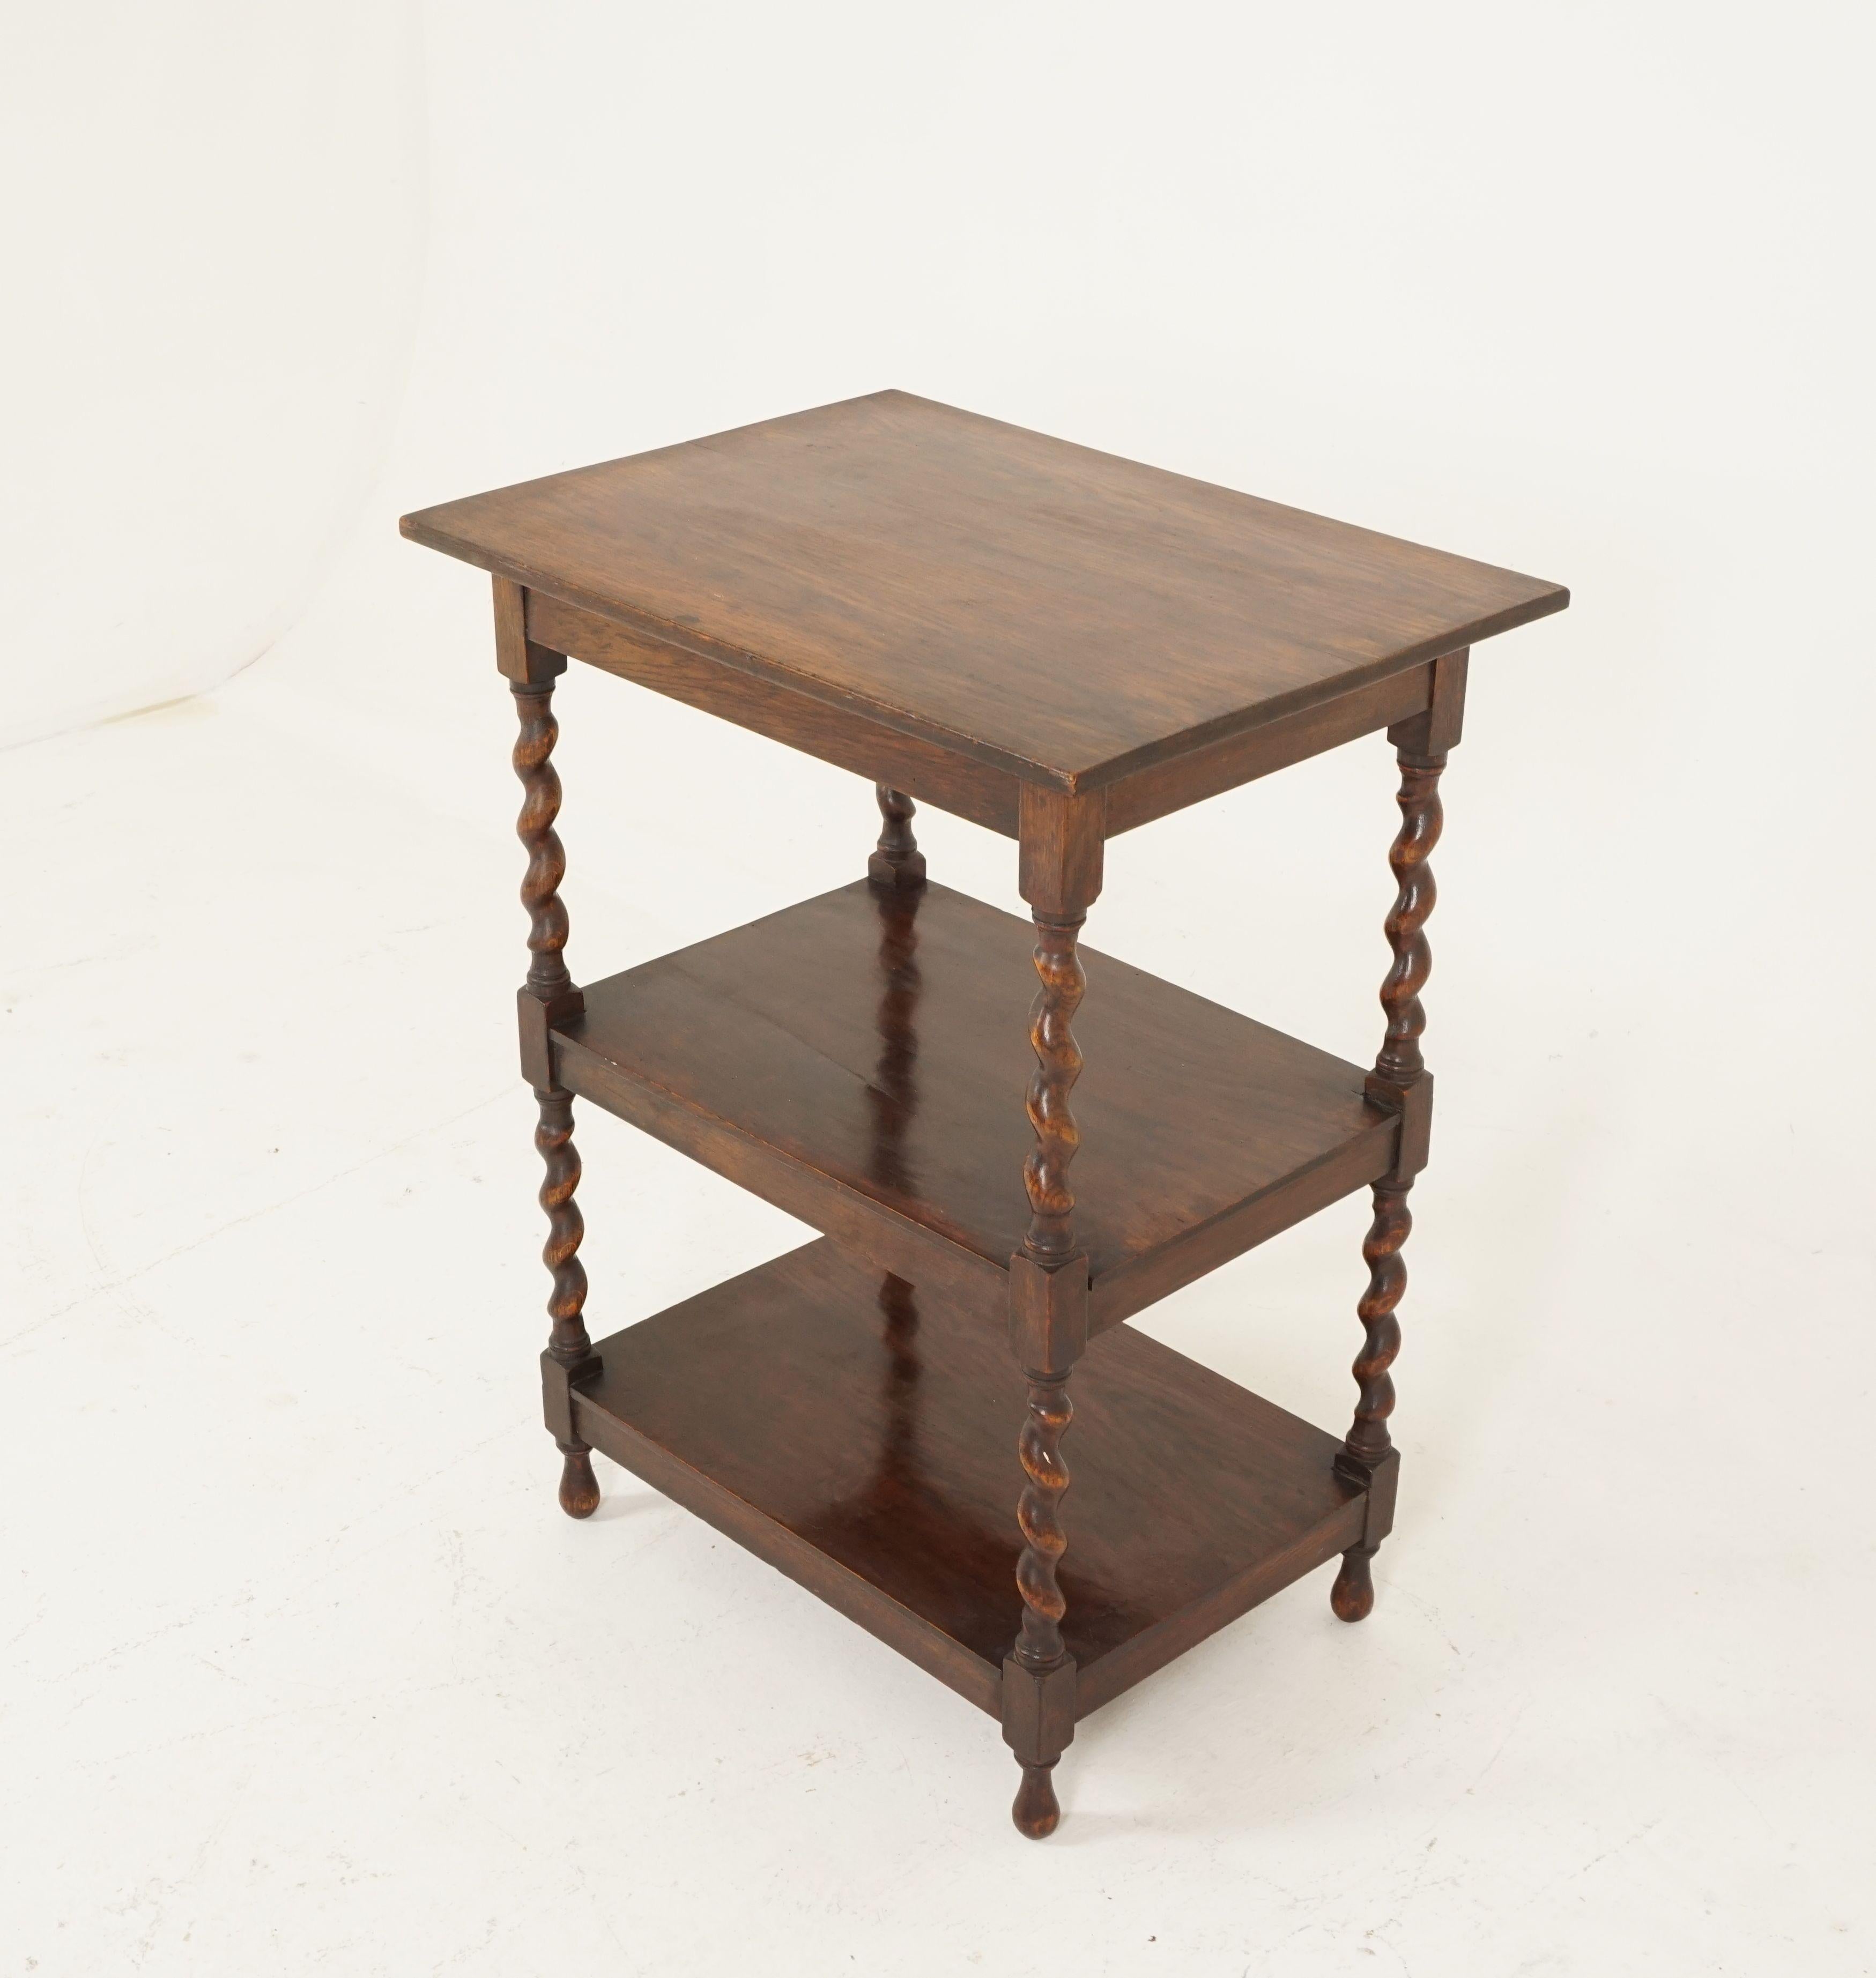 Antique barley twist 3 tier tiger oak table, side or lamp, Scotland 1910, B2349

Scotland, 1920
Solid oak
Original finish
Rectangular top
Four barley twist supports
Pair of shelves underneath
Ending on turned feet
Nice colour and in good